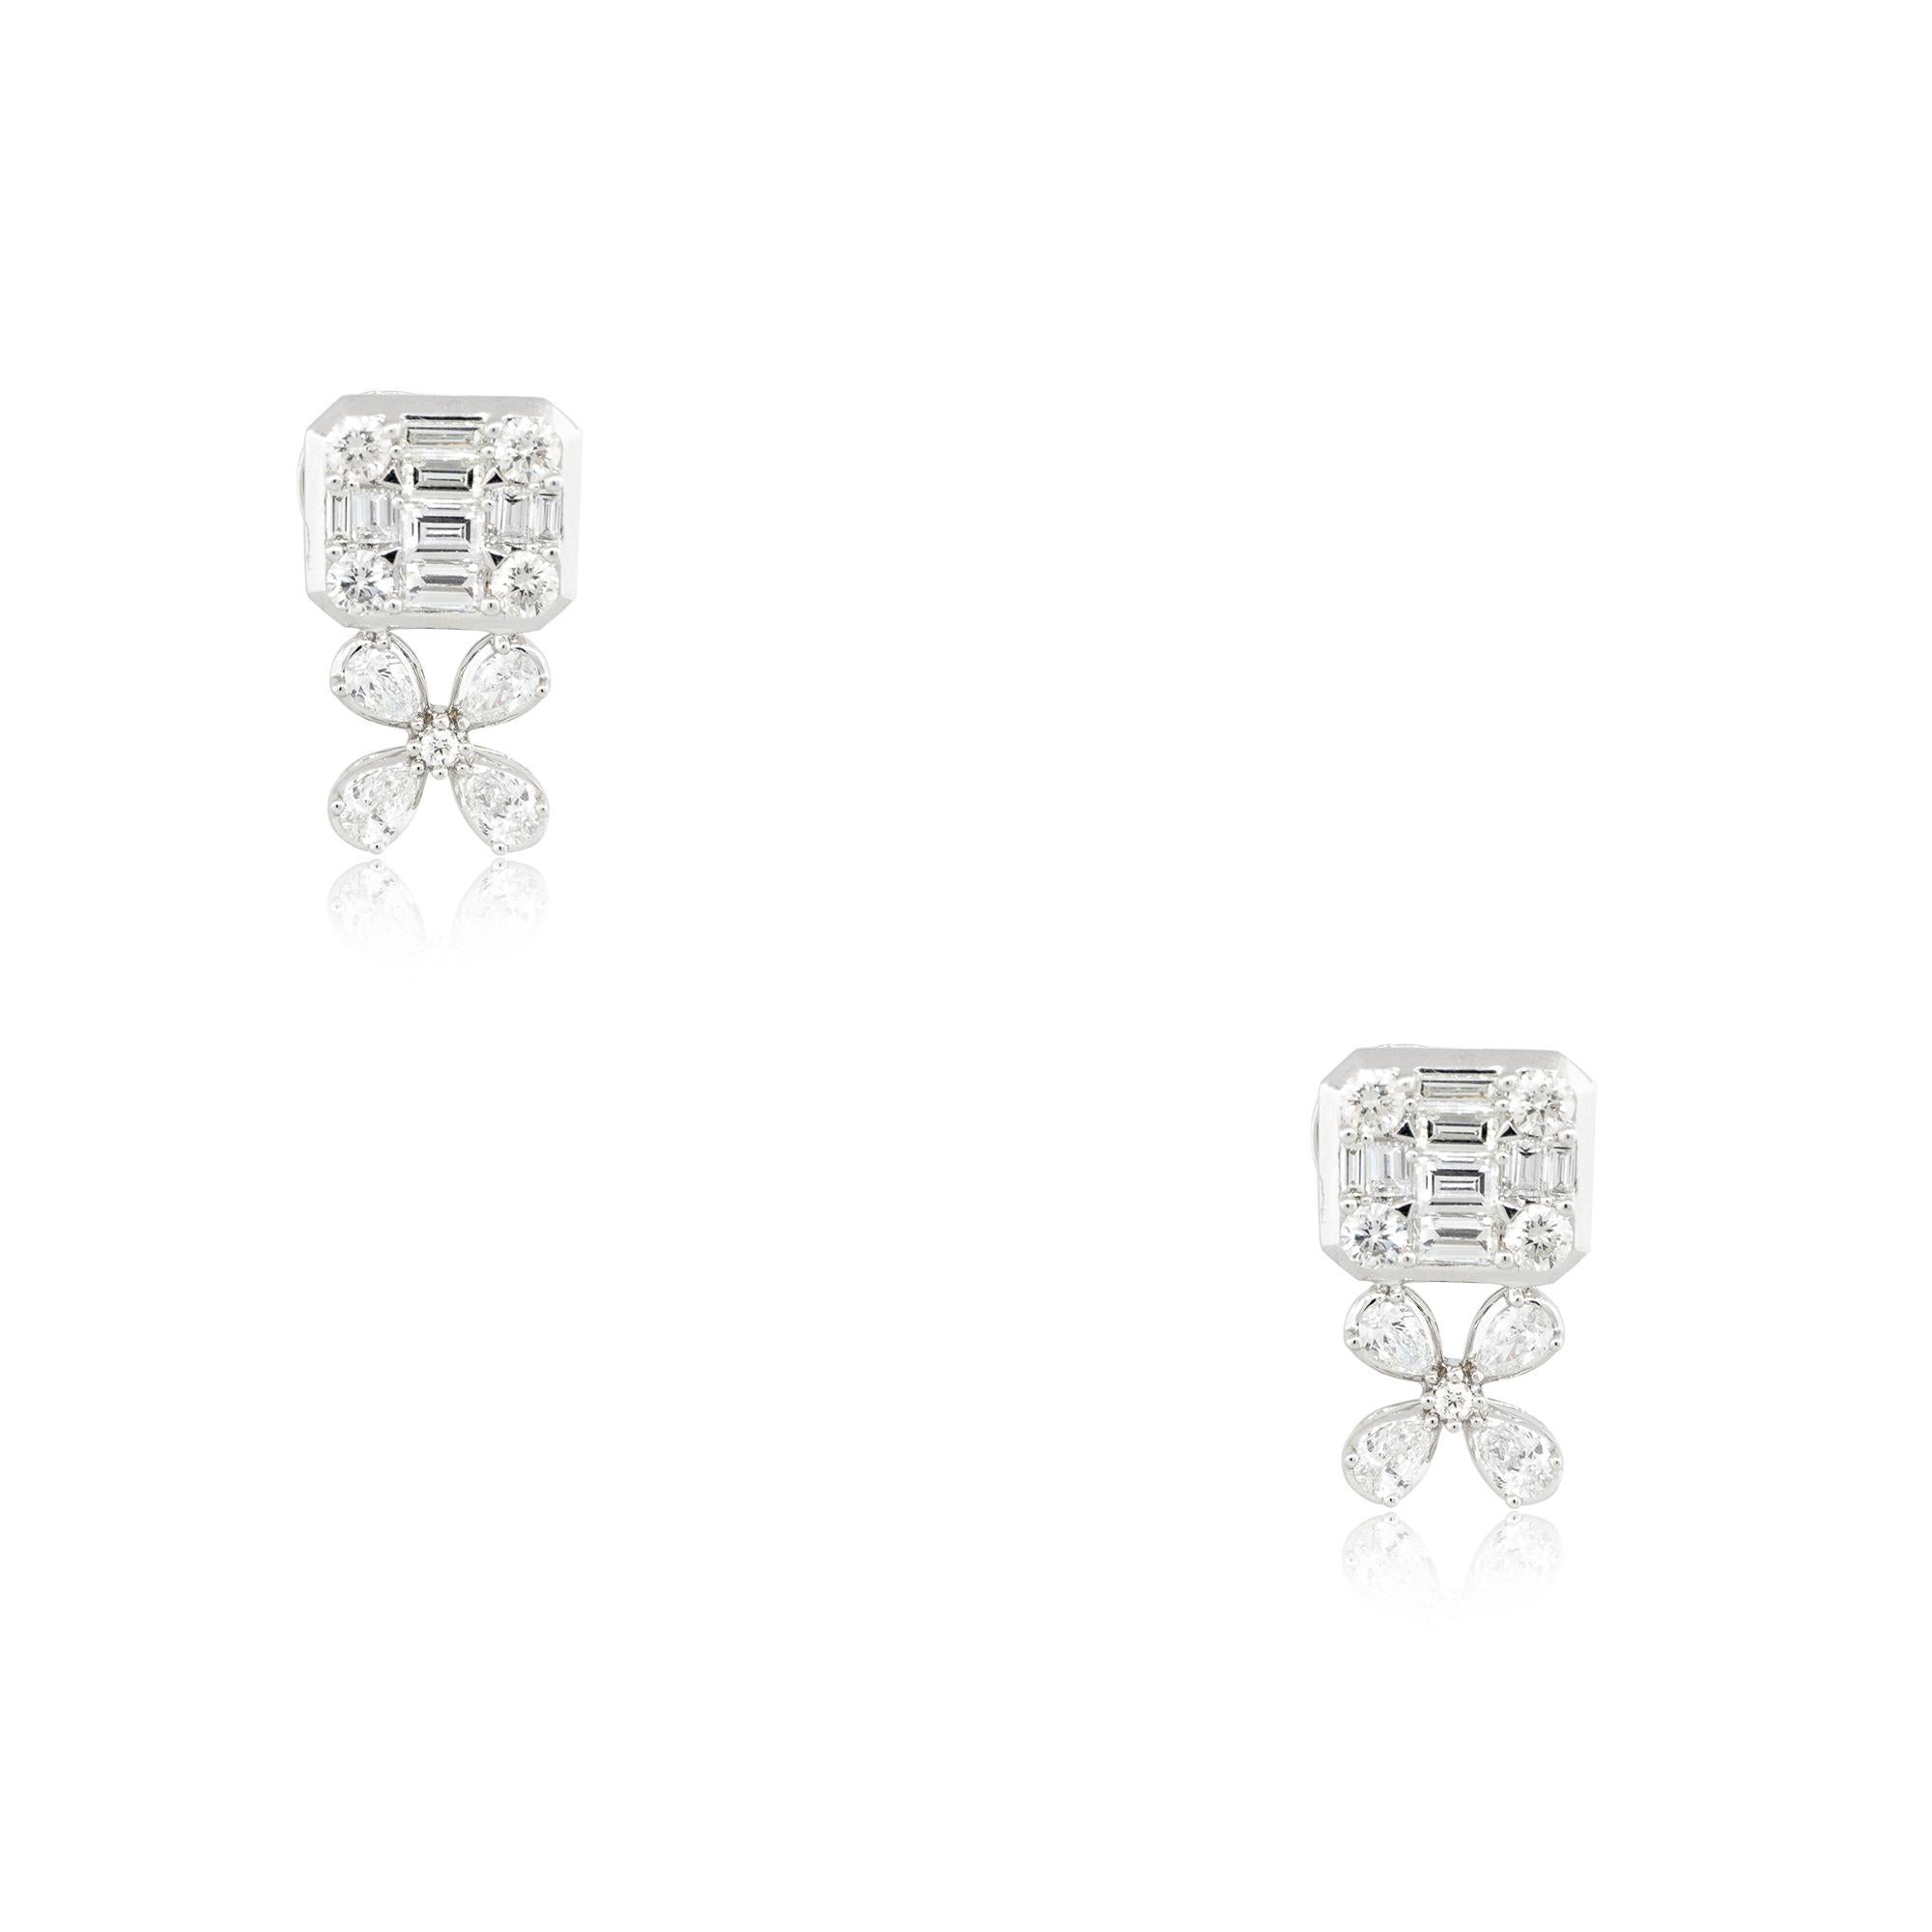 18k White Gold 2.61ctw Multi-Shape Diamond Flower Stud Earrings
Material: 18k White Gold
Diamond Details: Diamonds are approximately 2.61ctw of Round Brilliant, Baguette, and Pear shaped Diamonds. There are 34 diamonds total and all diamonds are